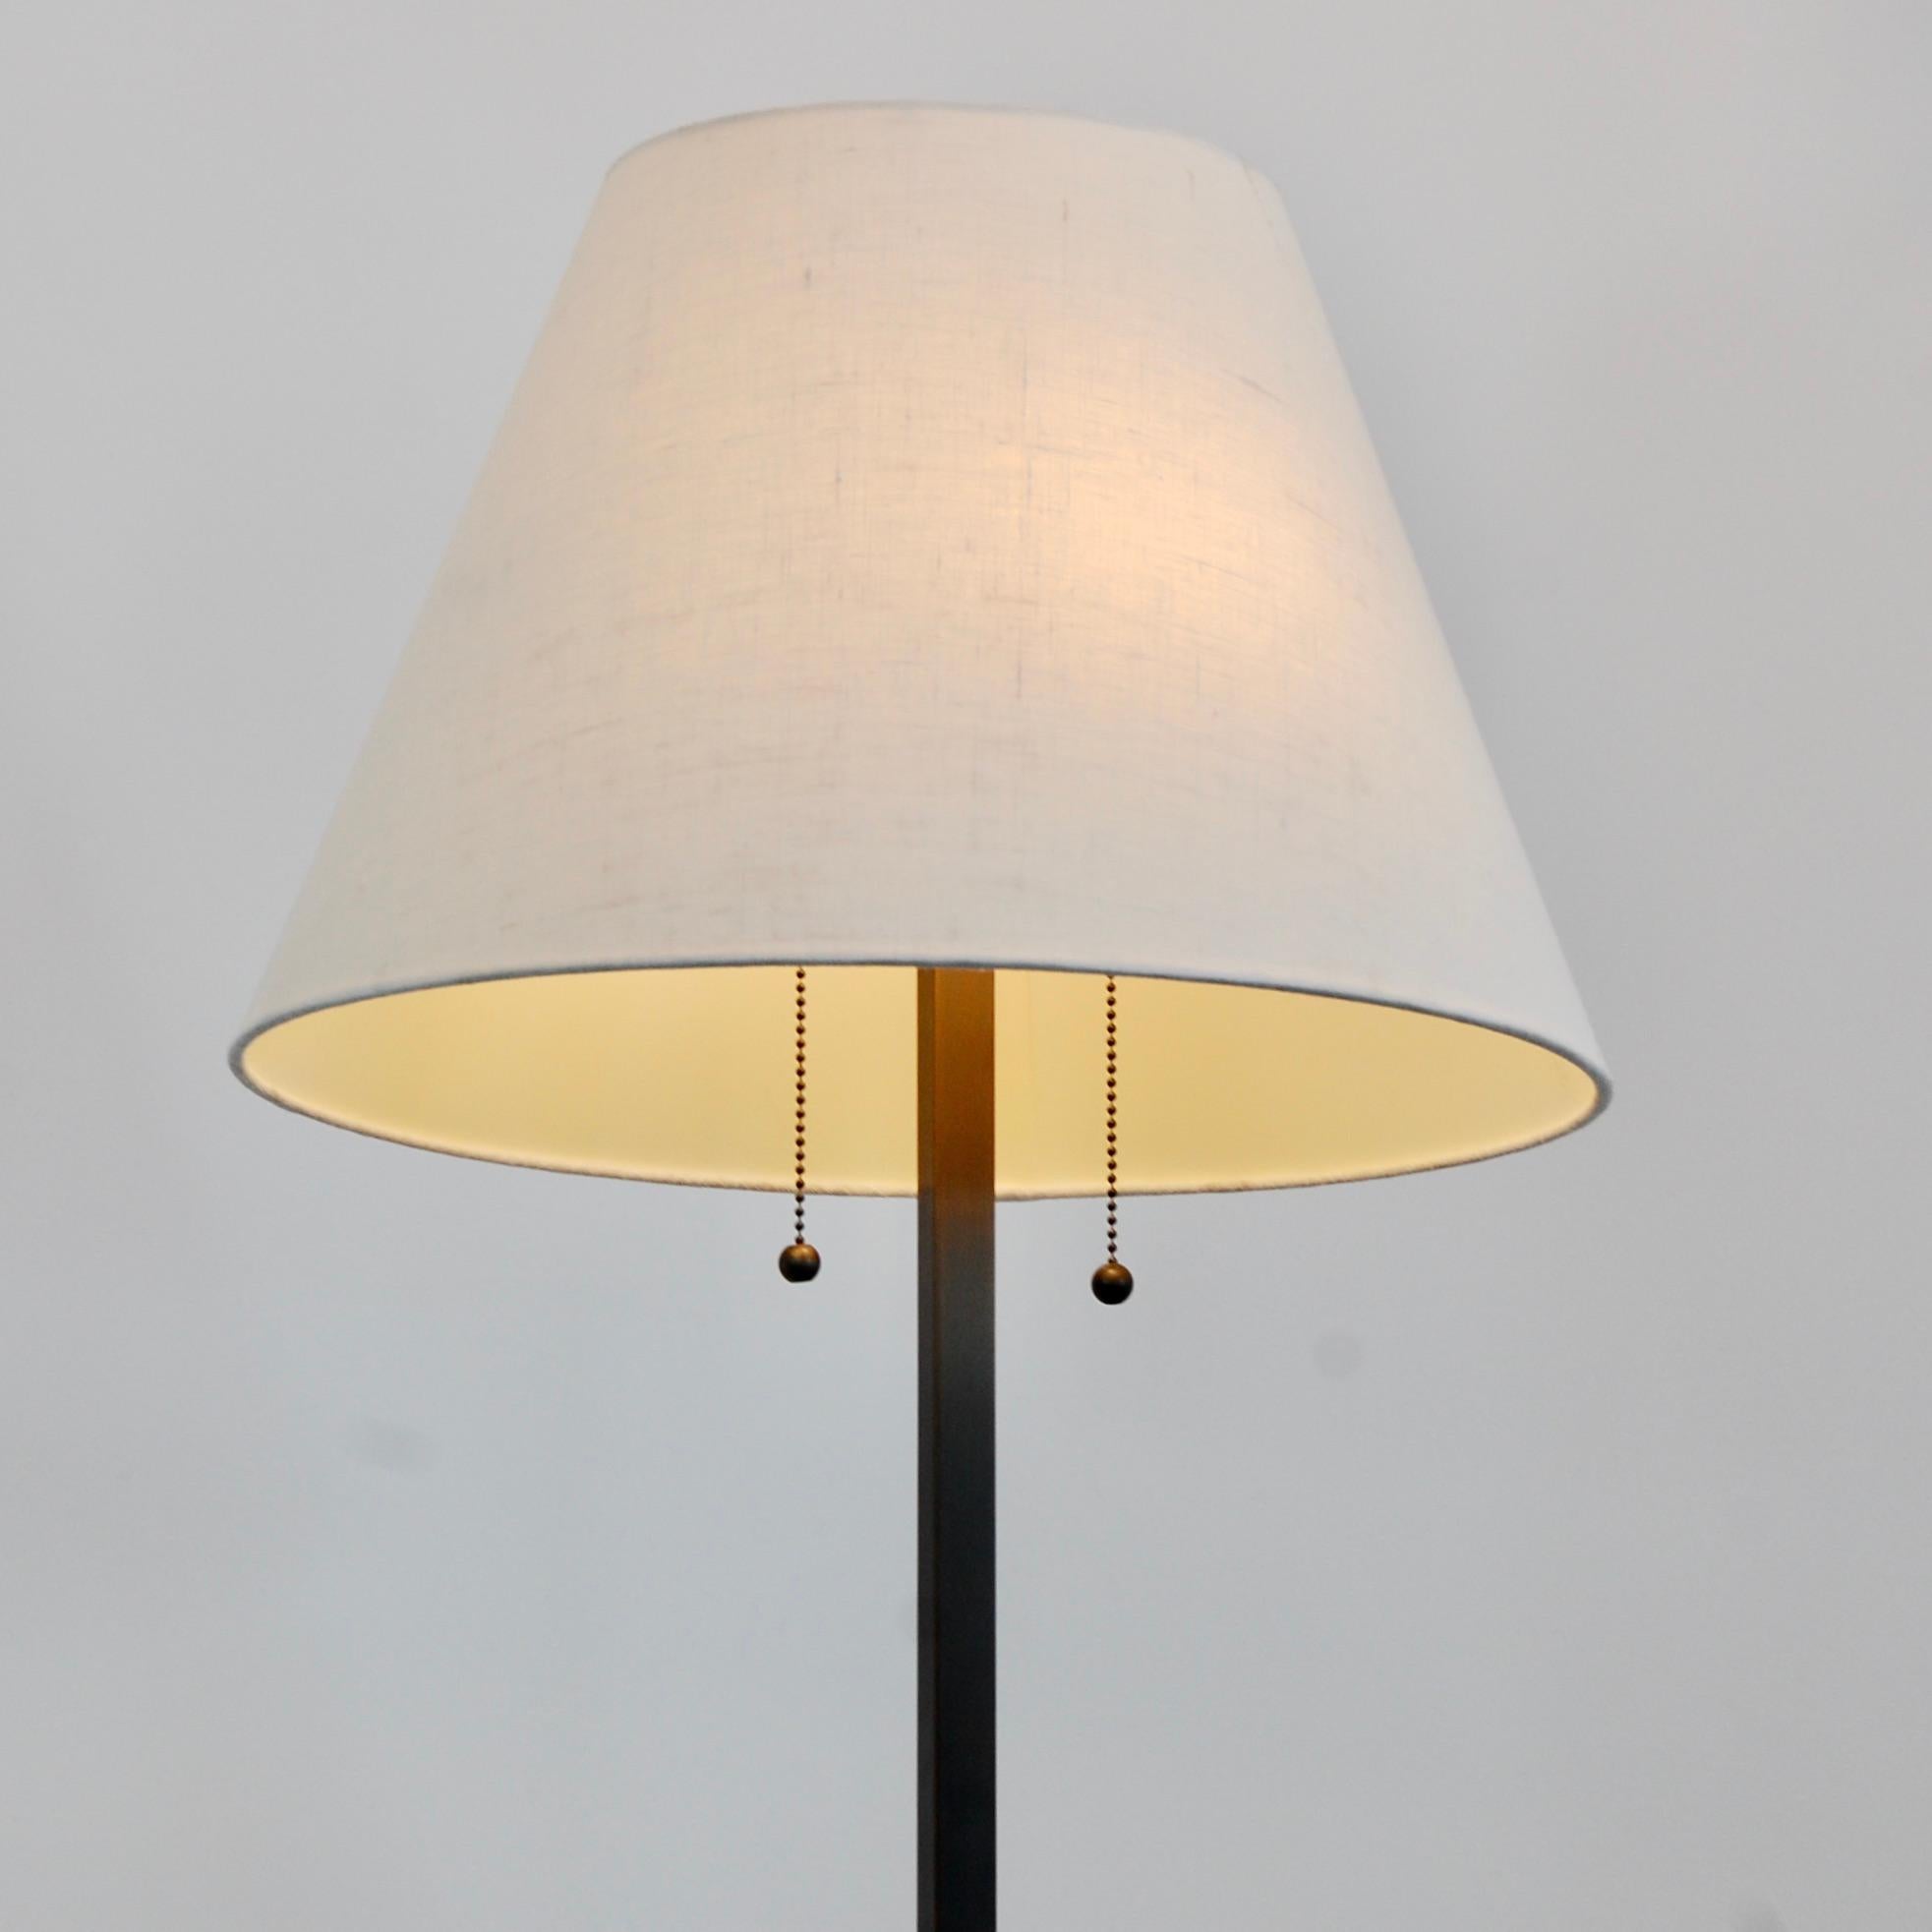 Elegant all-brass X-based mid-century modern inspired floor lamp. Detailed with a fabric shade, two pull switches from two E26 medium based sockets. Ready to be used in the USA. Finish: patinated brass. 
Measurements:
Height: 52” 
Diameter